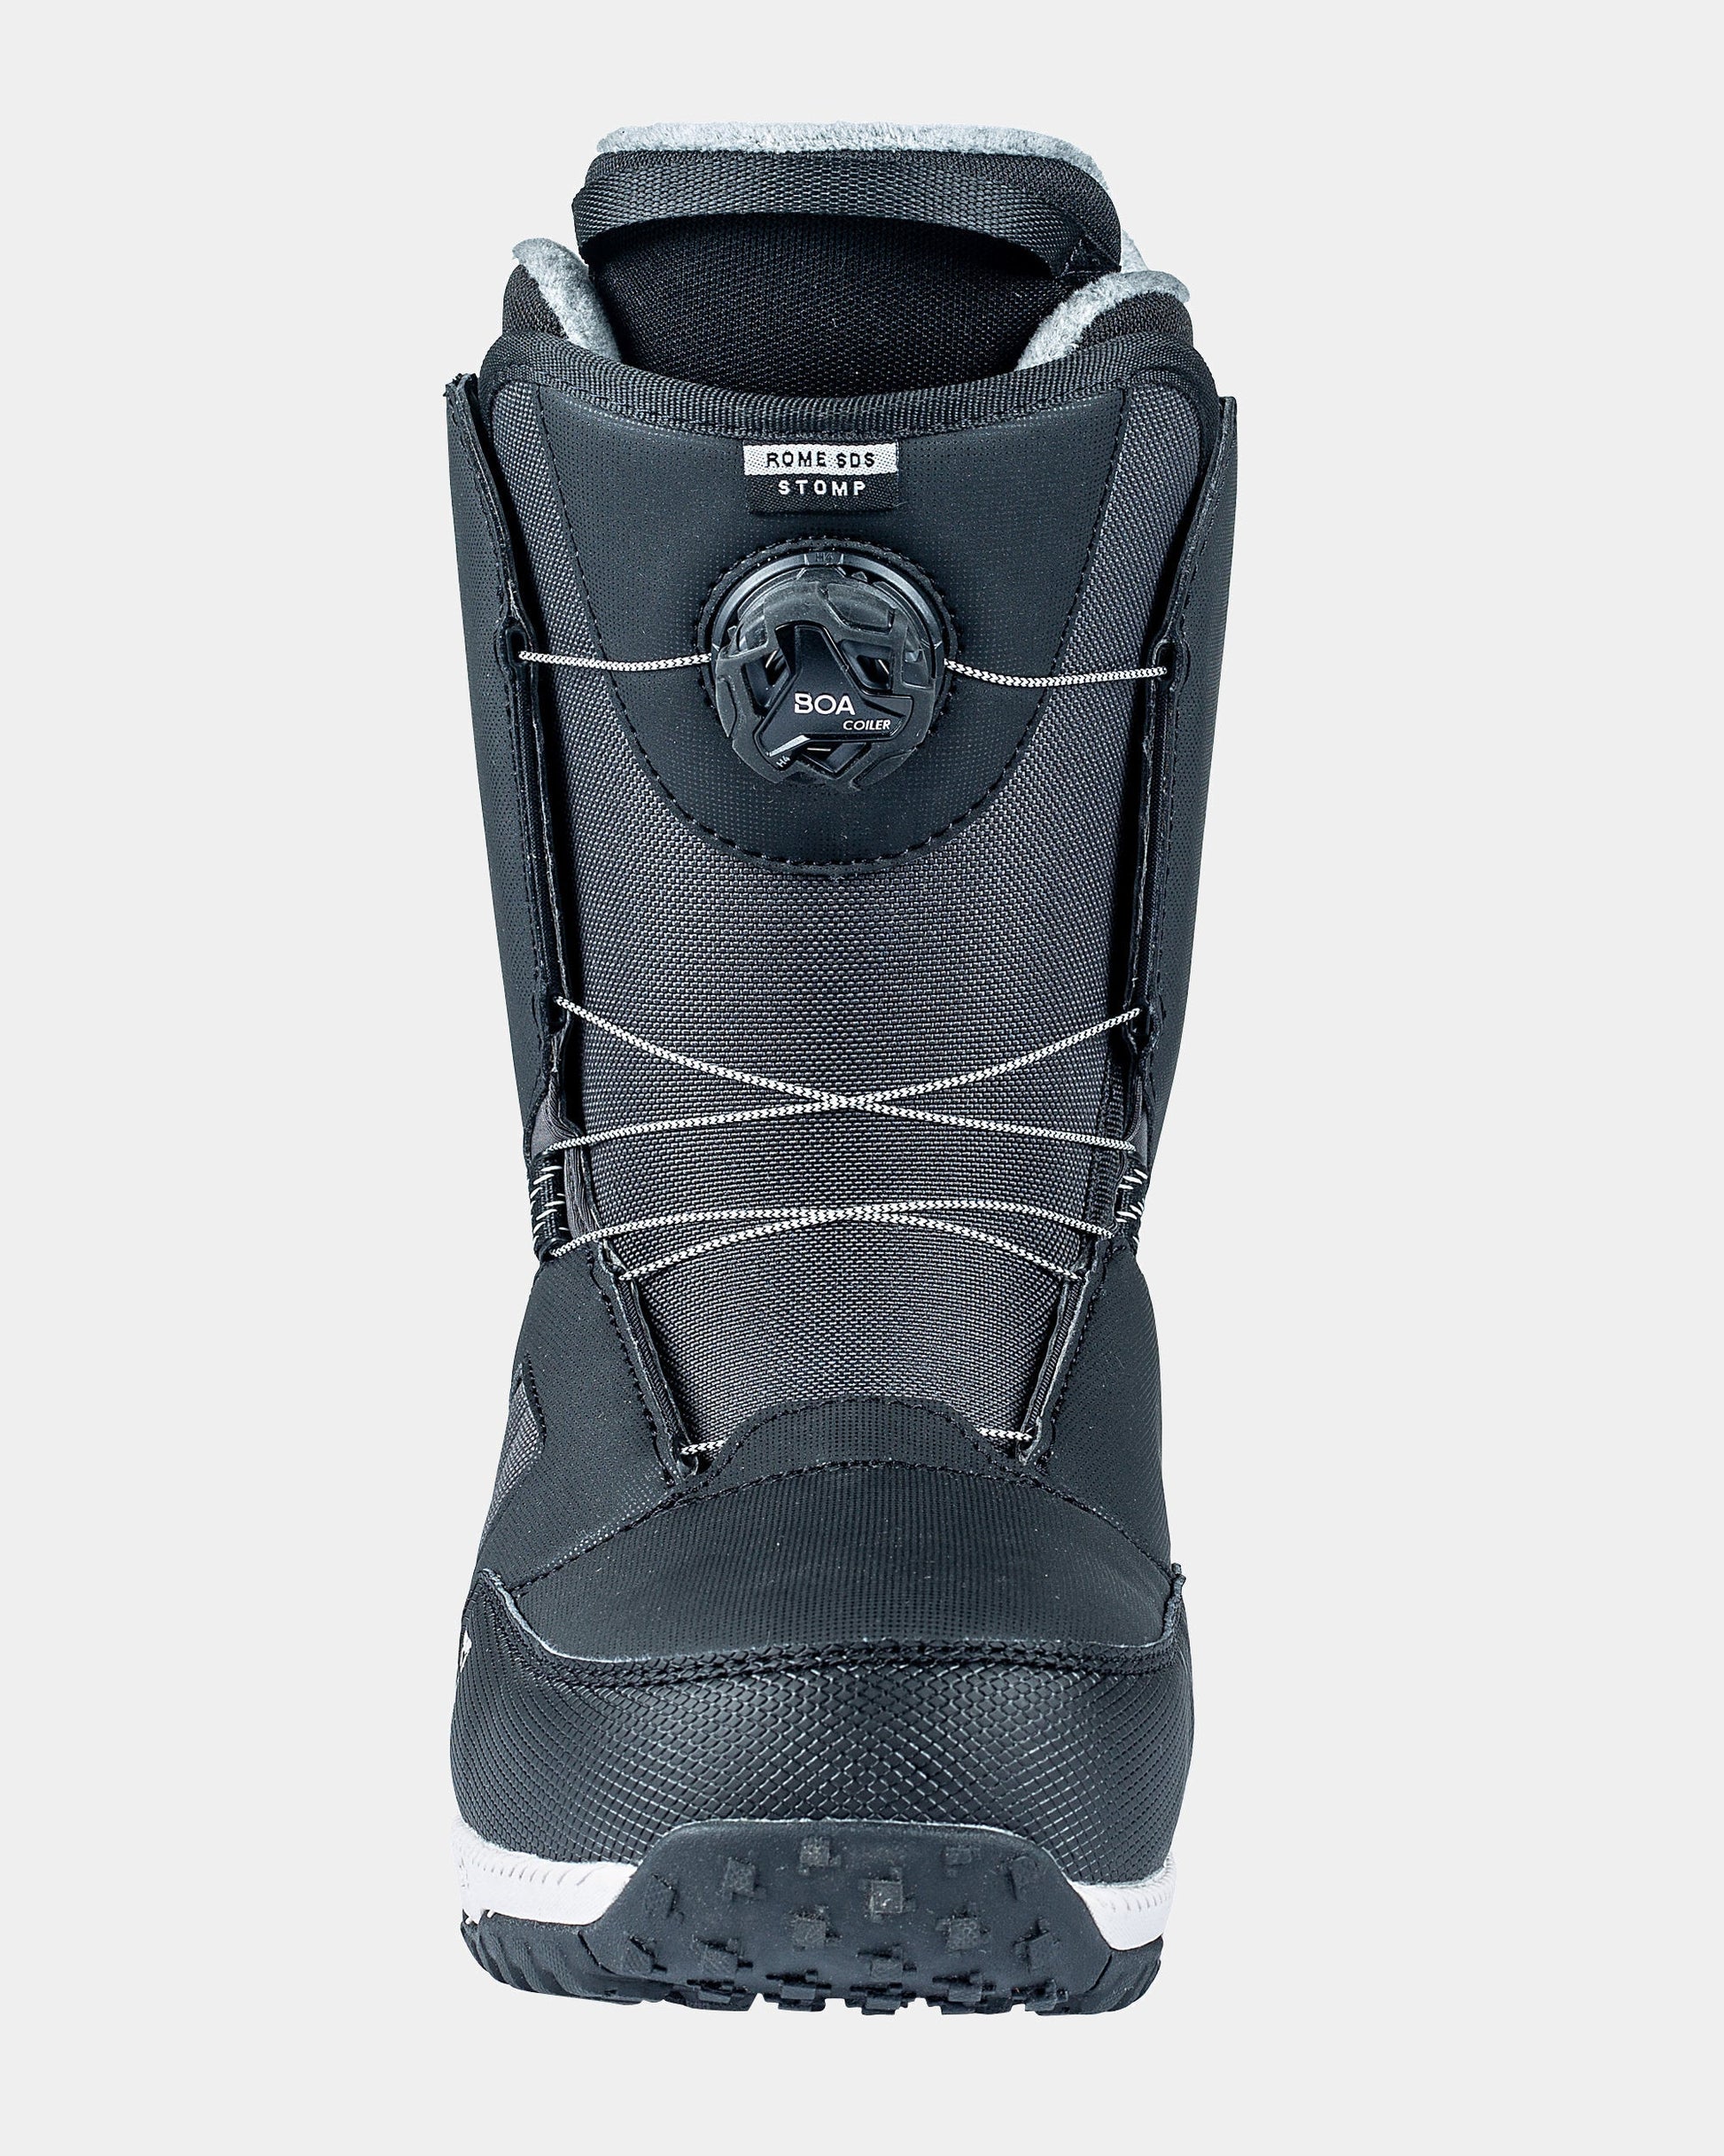 rome sds stomp 2023-2024 rome sds boots product image